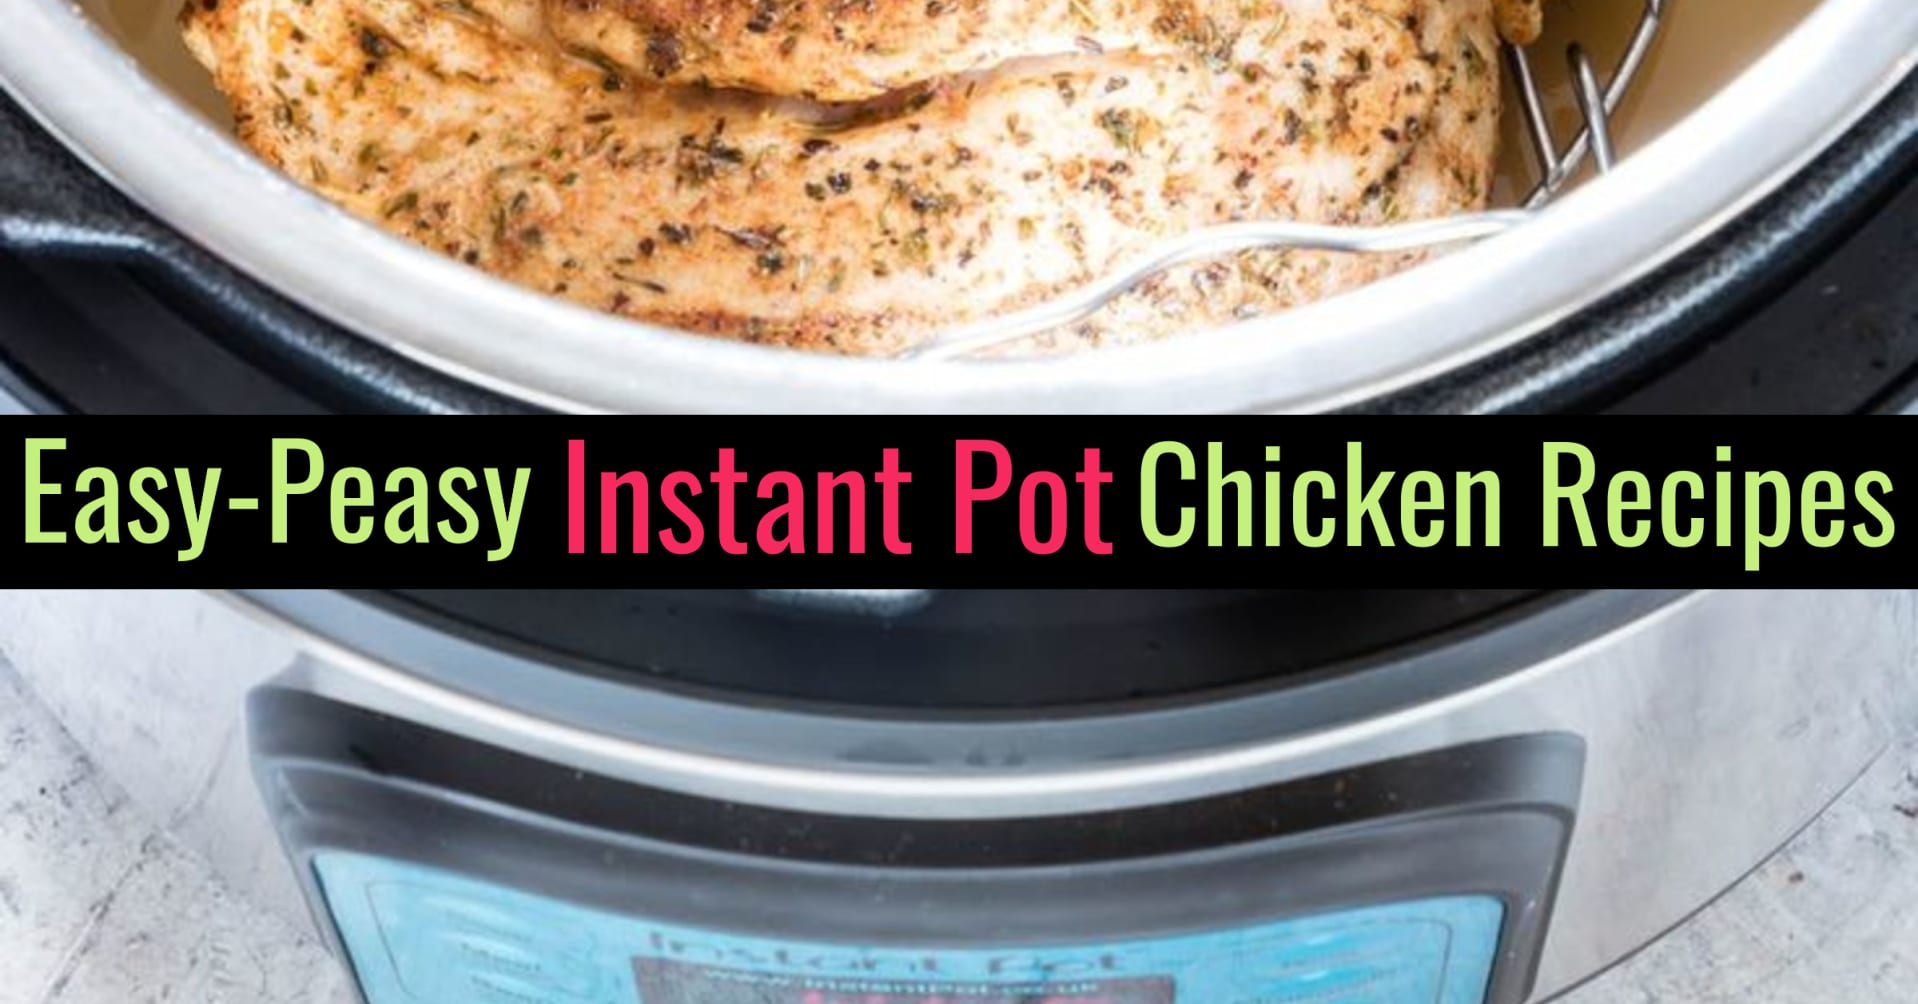 Easy Instant Pot Chicken Recipes for Beginners